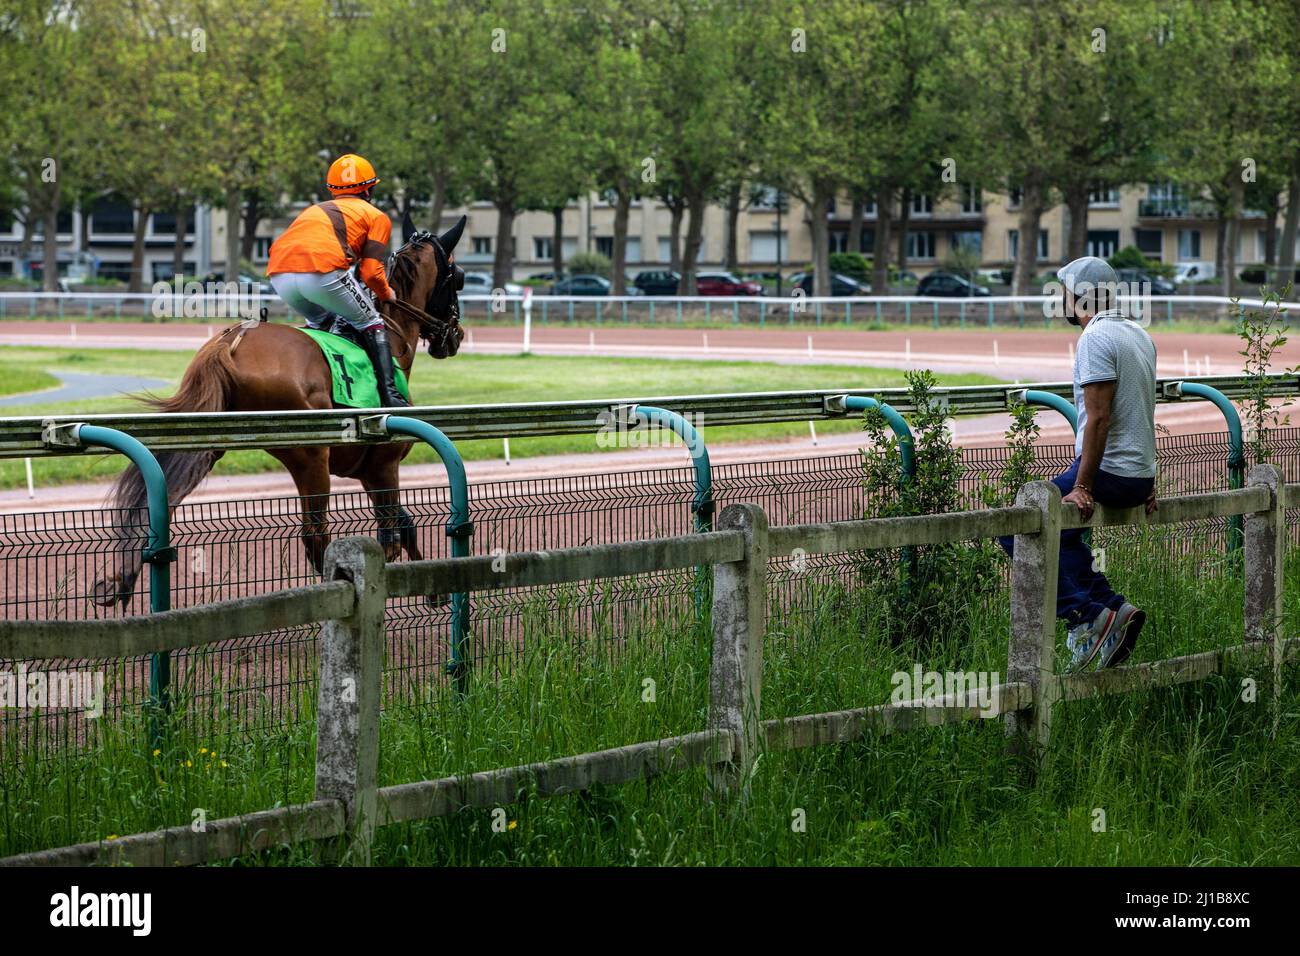 HORSE RACES AT THE RACE TRACK IN THE CITY CENTER, THE PRAIRIE, CAEN, CALVADOS, NORMANDY, FRANCE Stock Photo